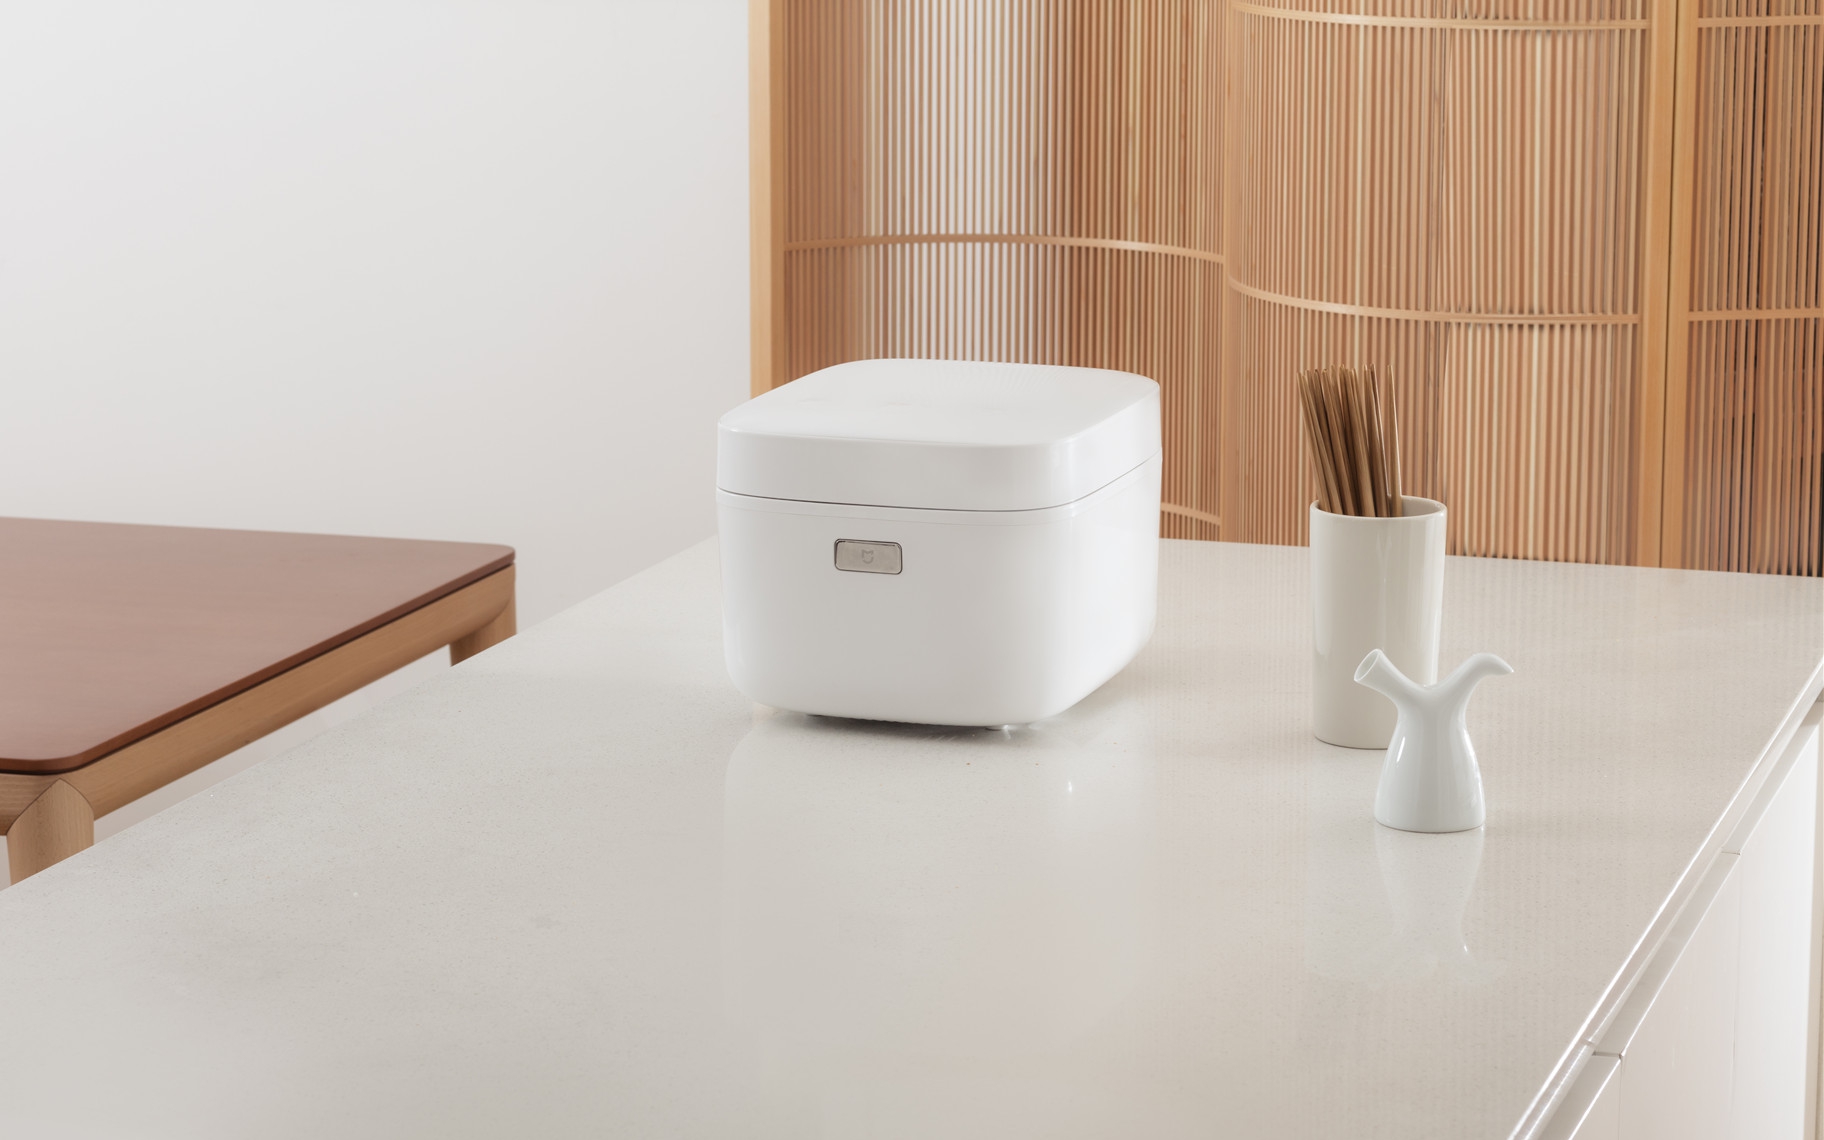 China's Xiaomi unveils a $150 smartphone-controlled rice cooker